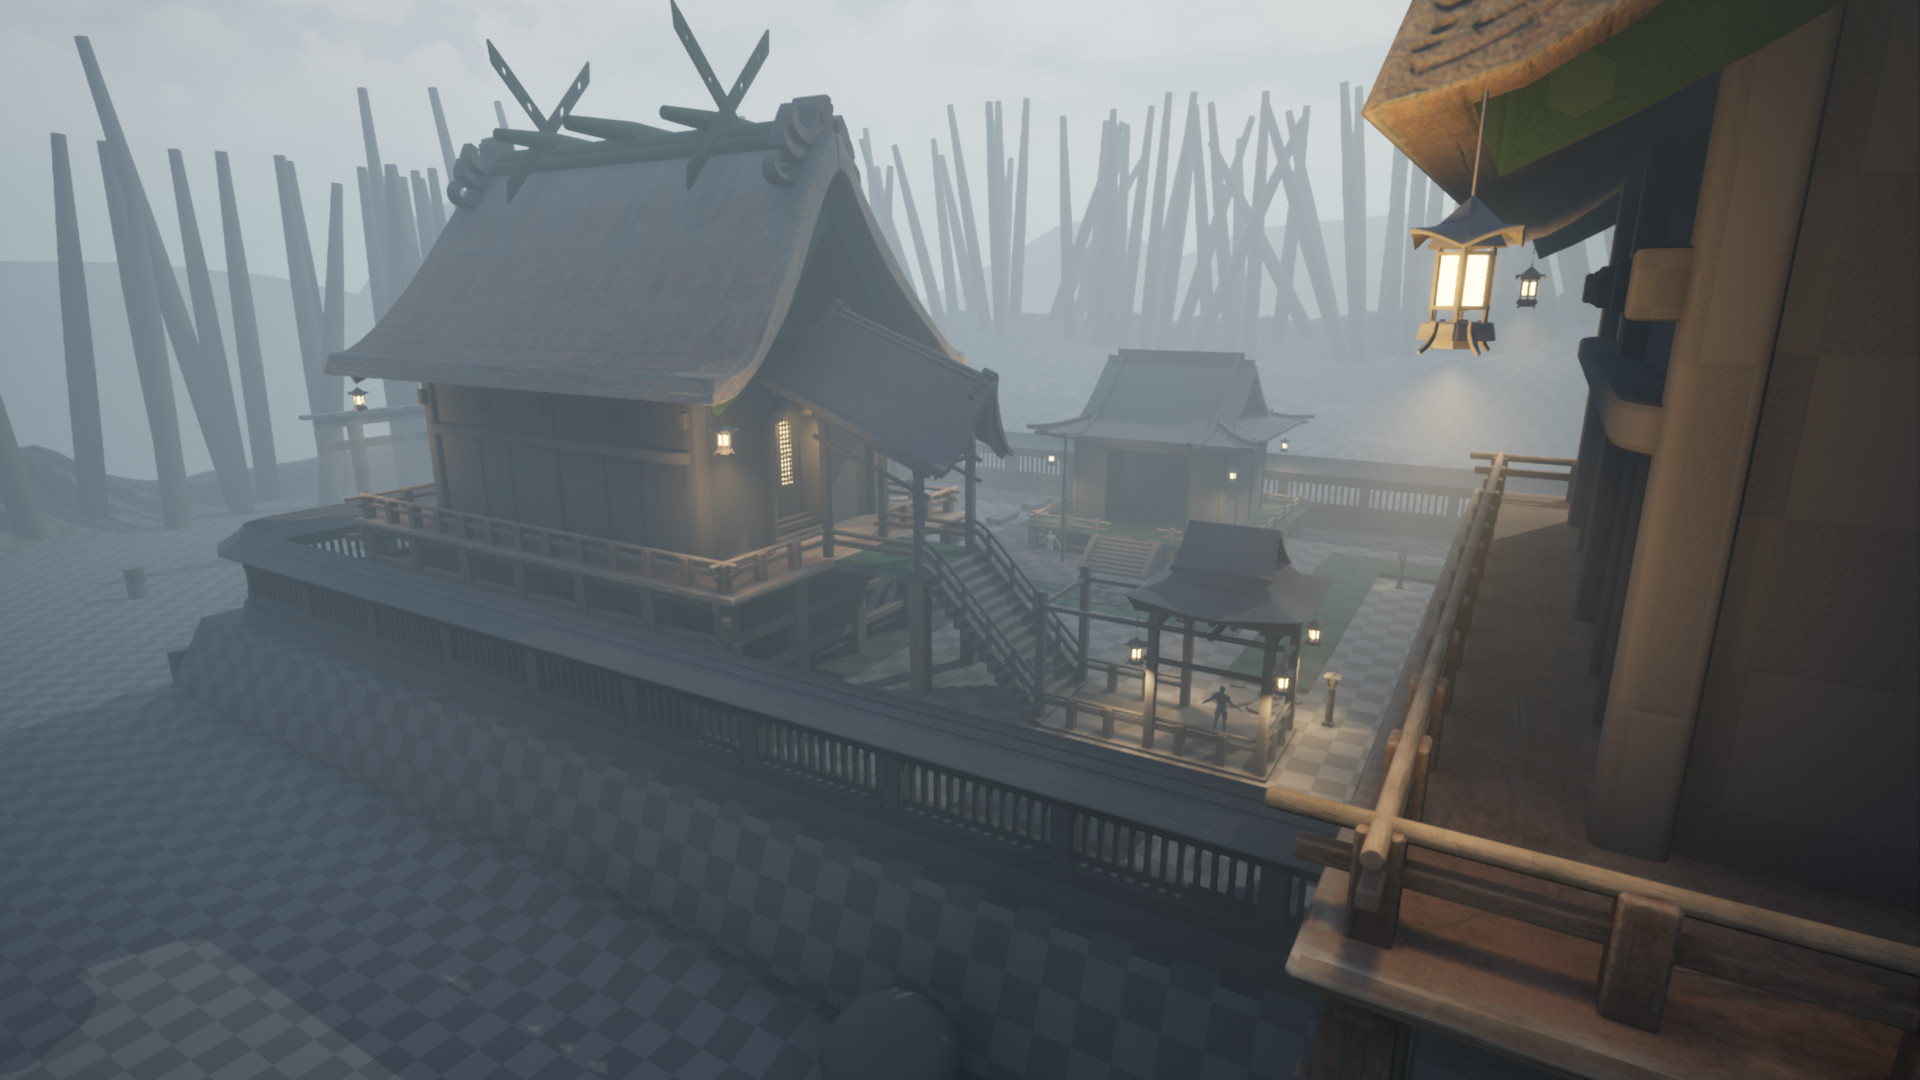 Screenshot of a camera between two buildings, close to them, Unreal 4. One can observer the wooden beams and supports, fully textured now. The roof has a wooden texture as well. There are hanging lantern props that cast some Point Lights too. In the distance, where the landscape ends, there are long, sharp cylinders that are indicating placeholder trees creating a forest.